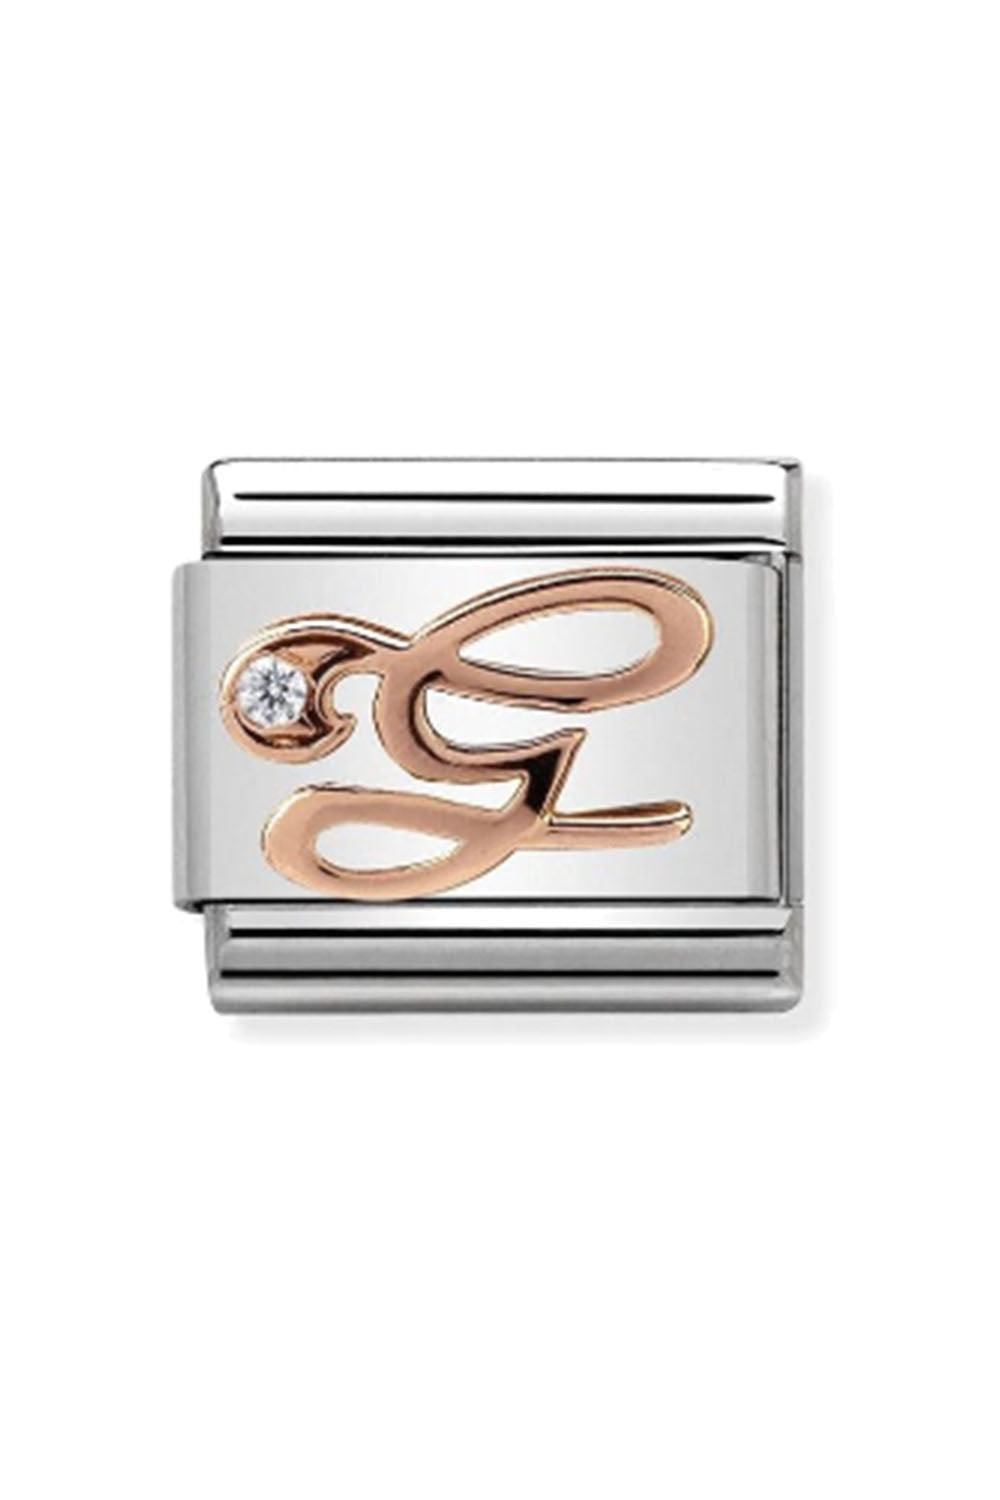 LETTERS 9k rose gold and CZ G